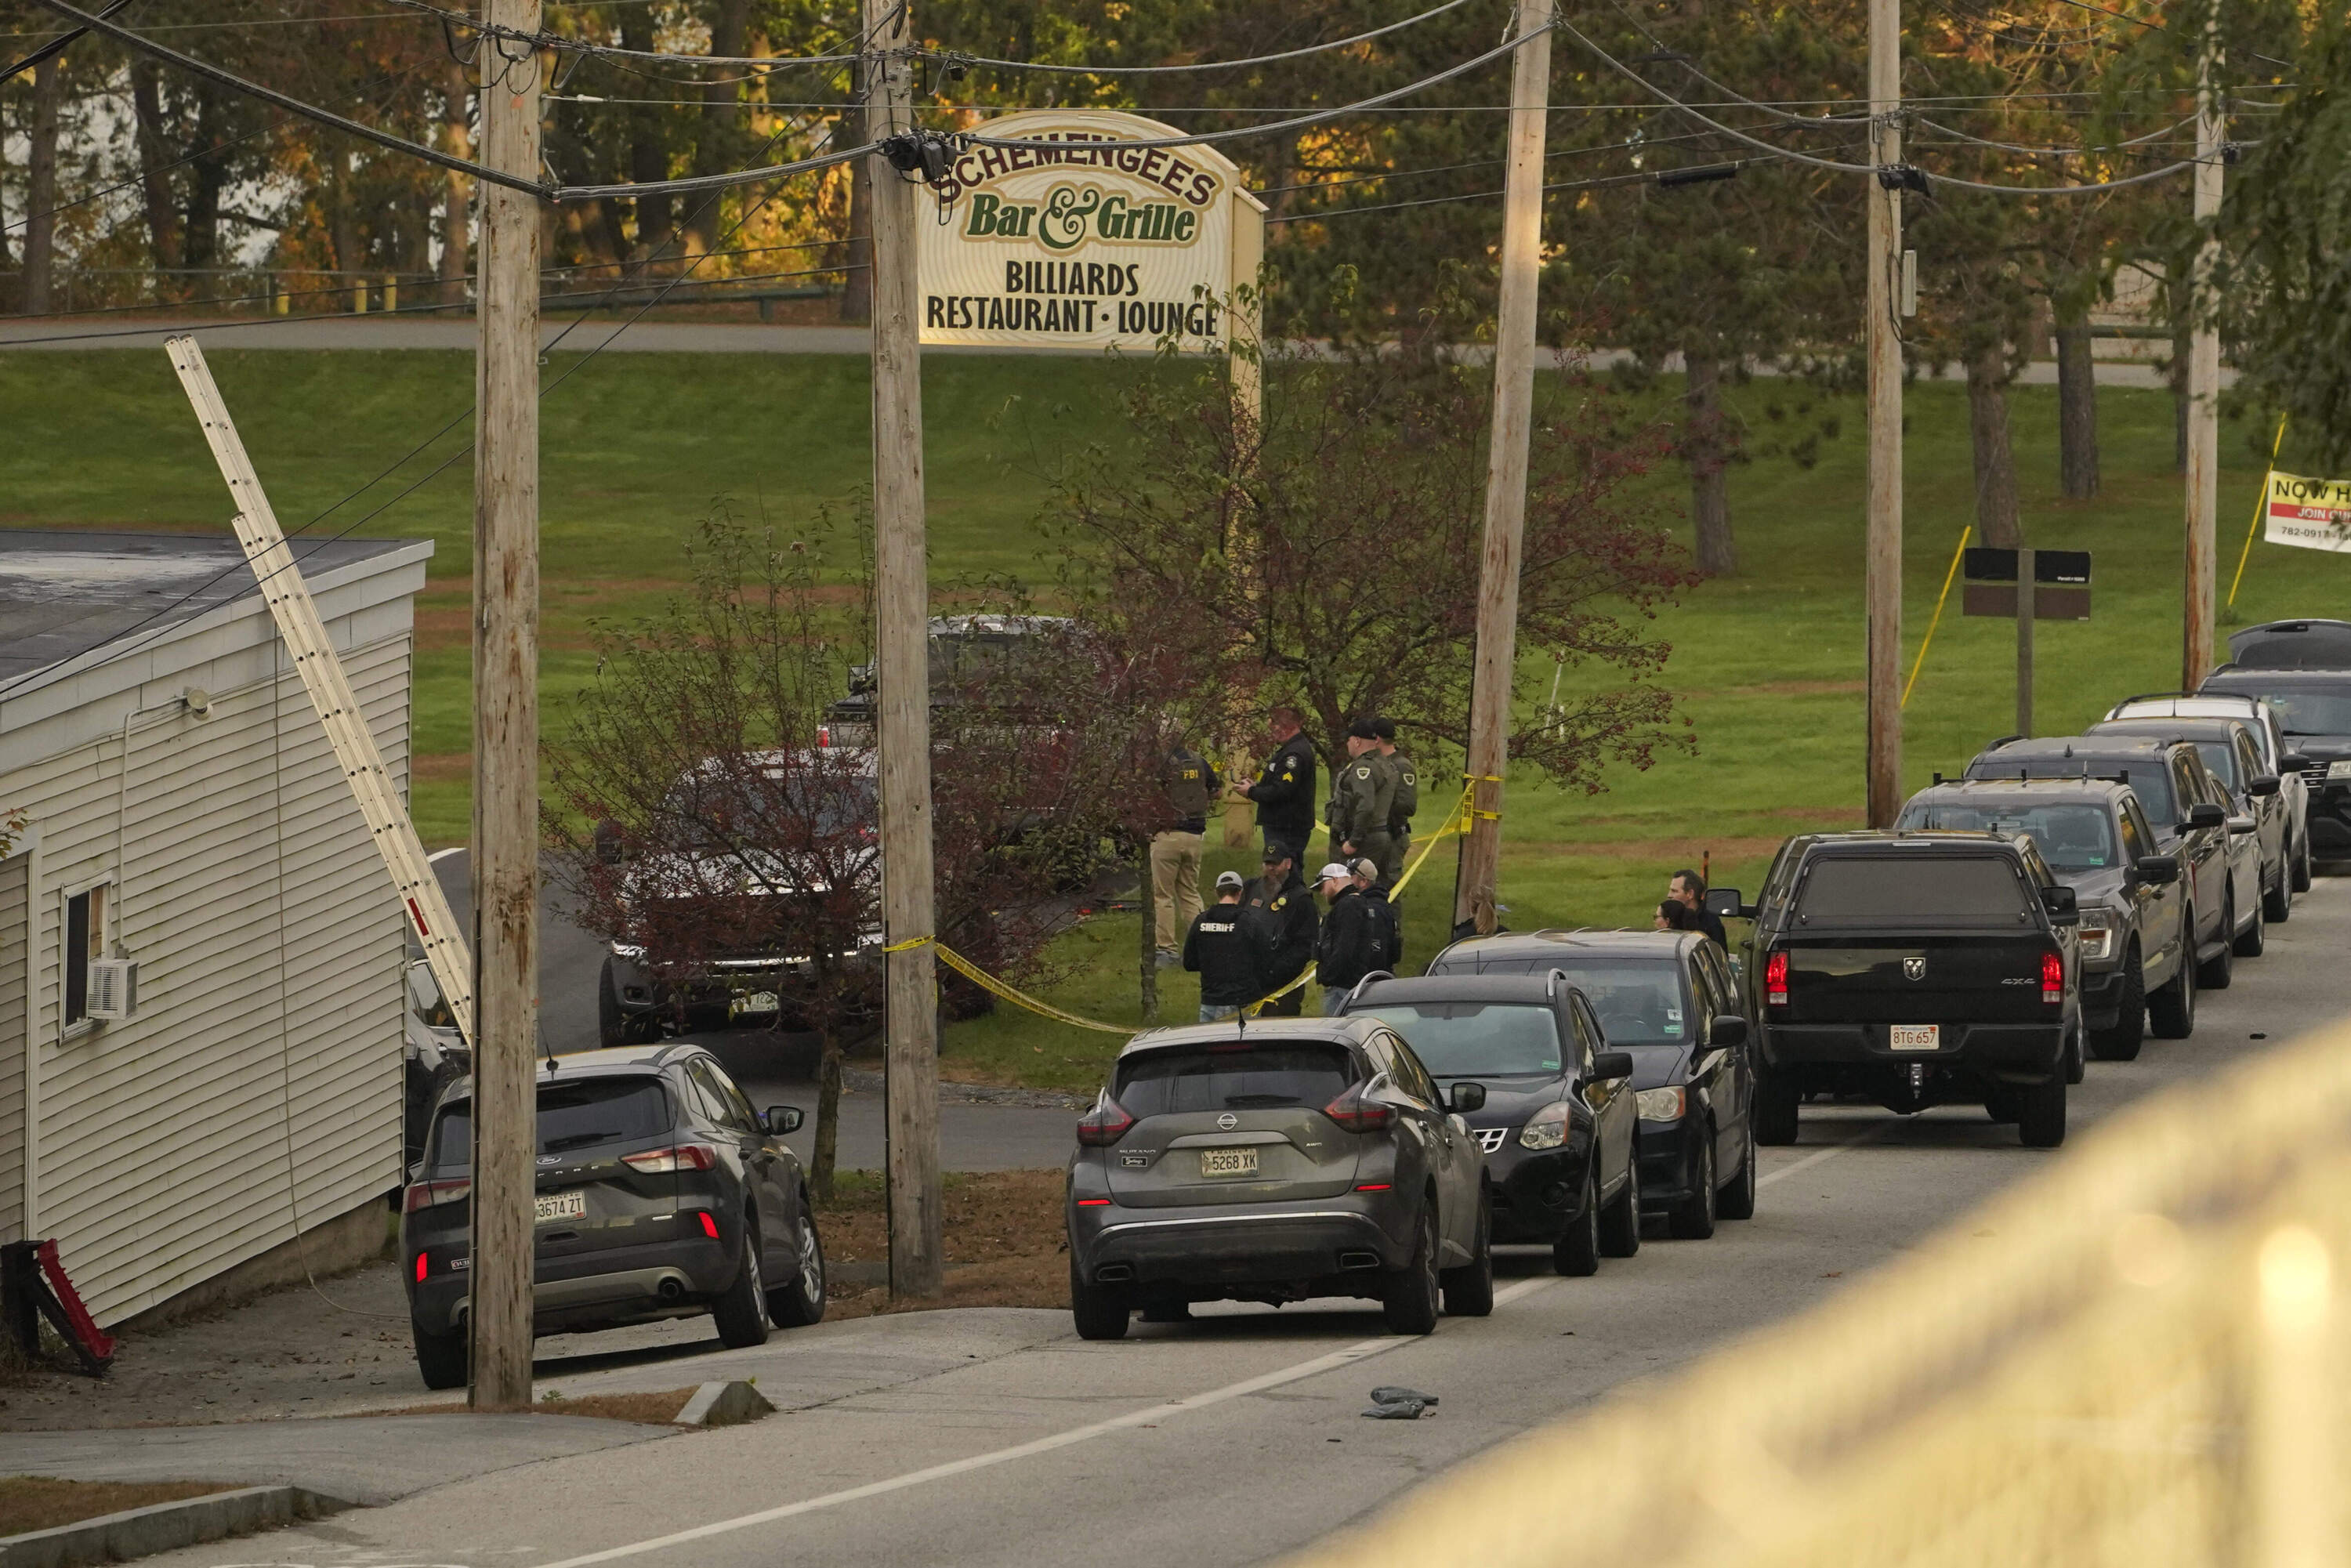 Law enforcement gather Thursday morning outside Schemengee's Bar and Grille in Lewiston, Maine. (Robert F. Bukaty/AP)